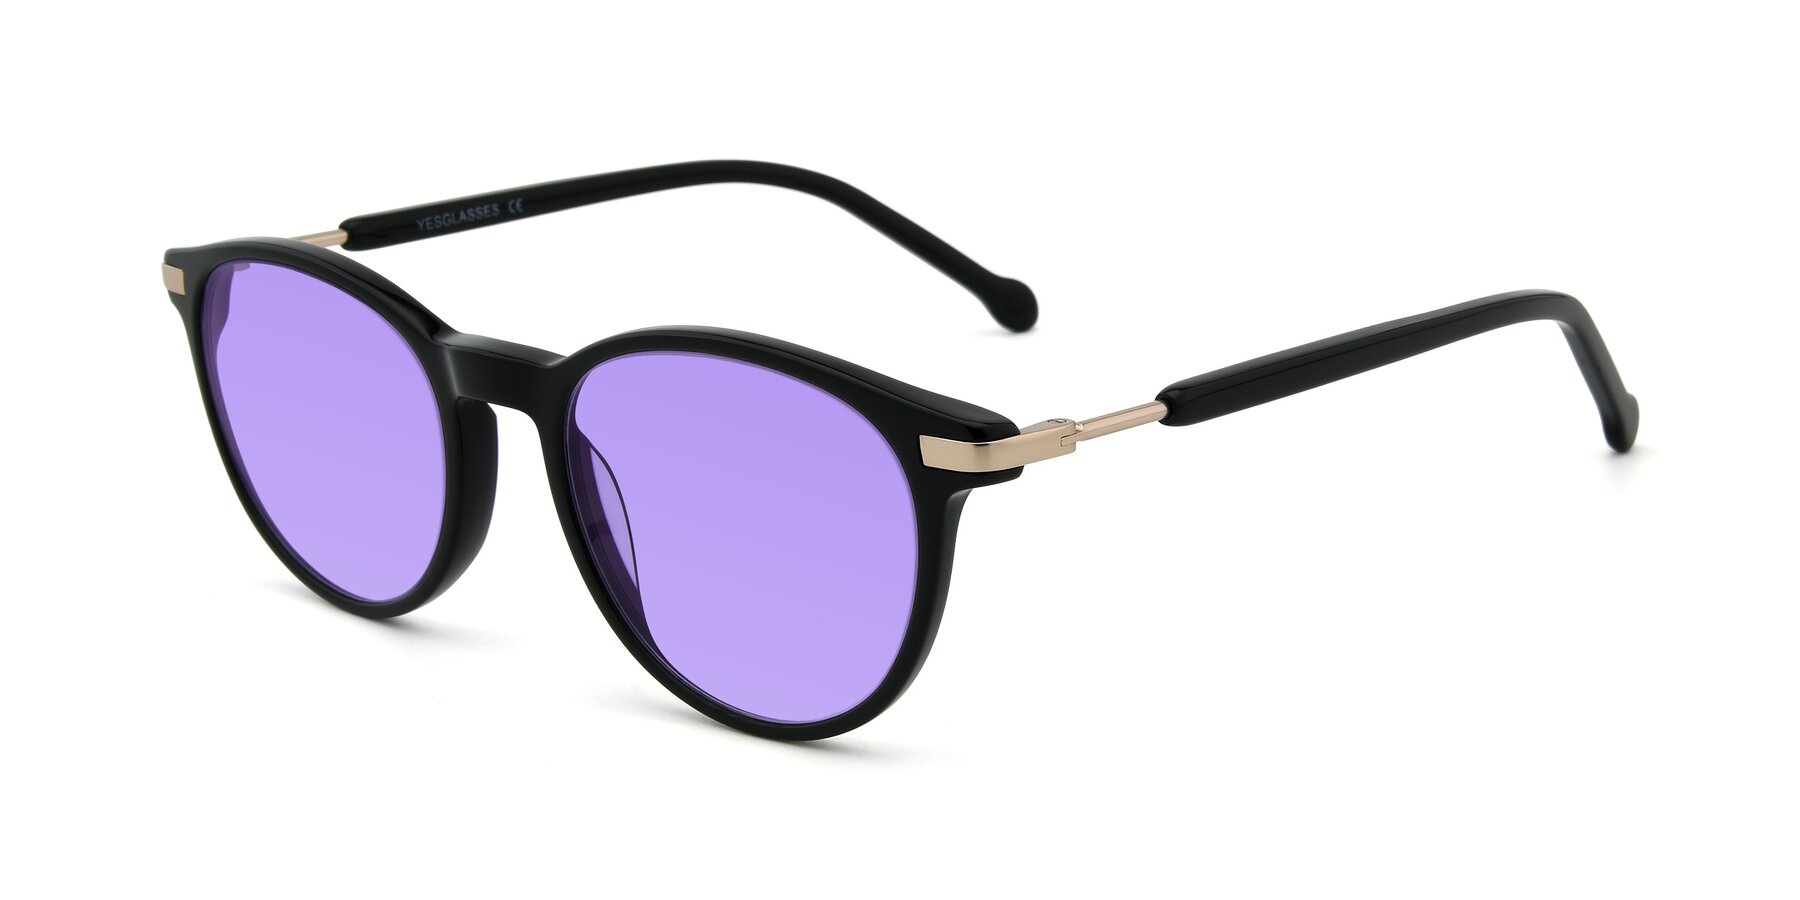 Angle of 17429 in Black with Medium Purple Tinted Lenses